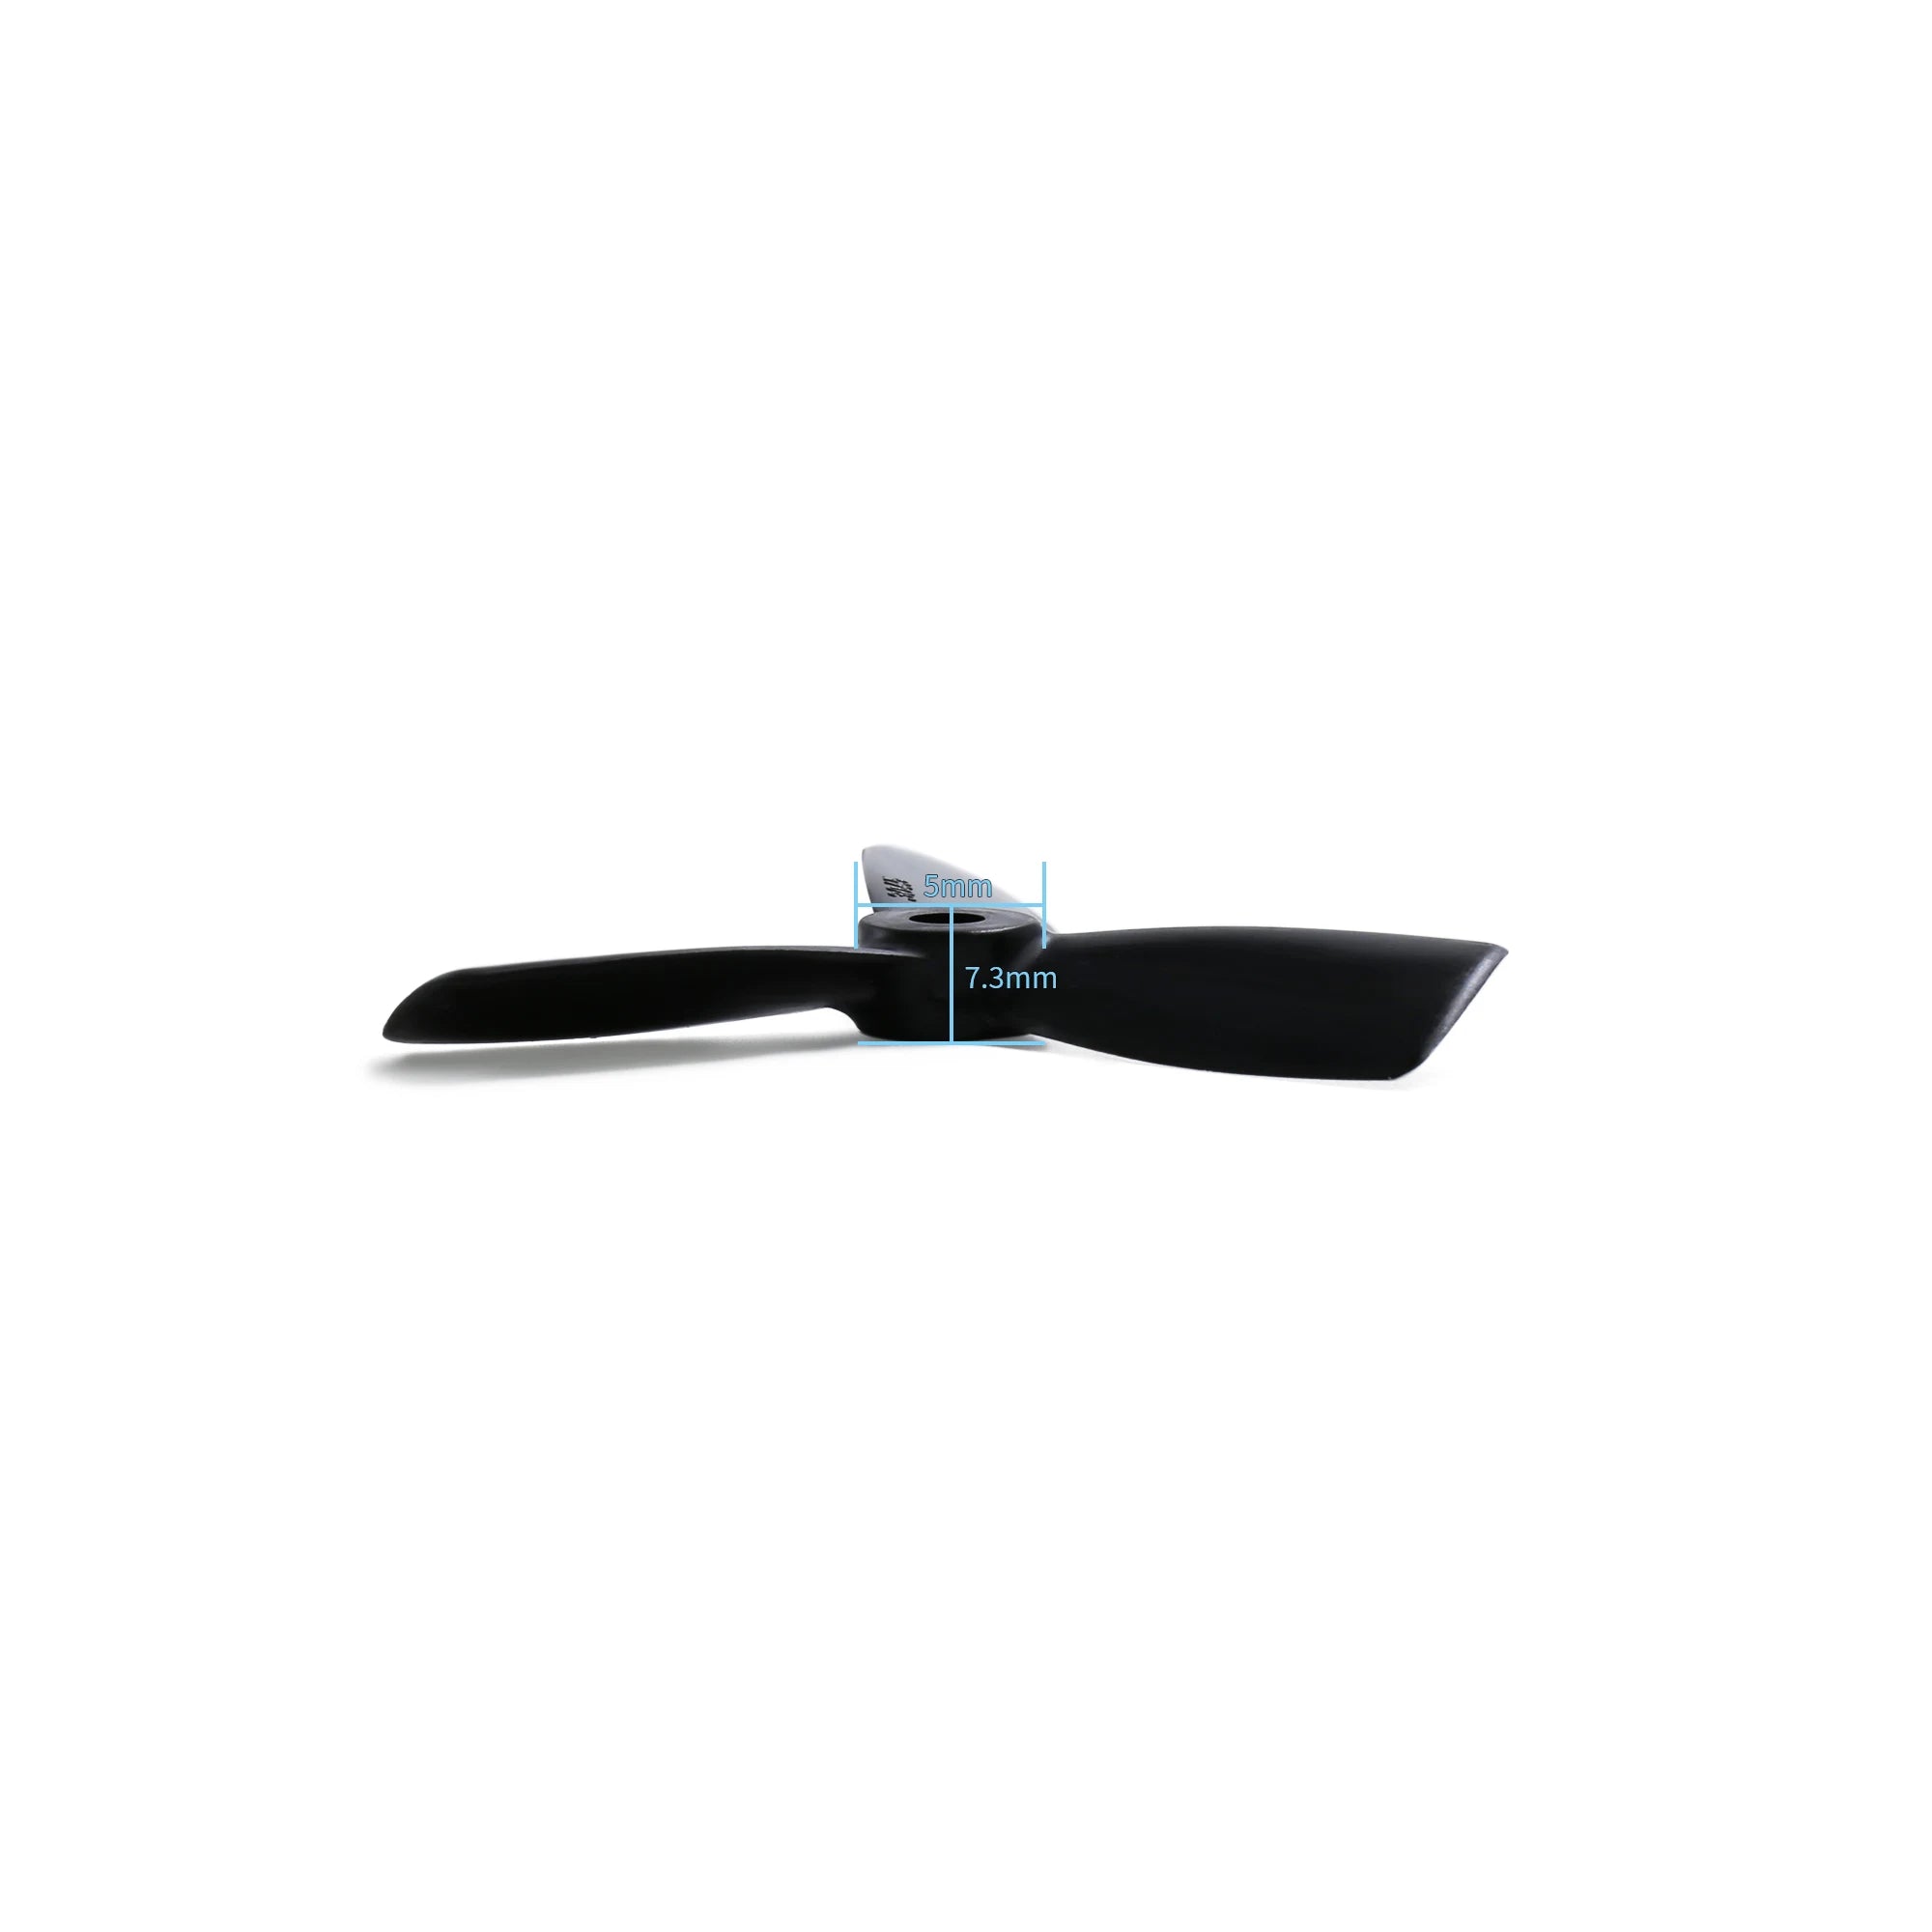 GEPRC G3045 Propeller, the optimized and upgraded design of airfoil It has Better flexibility and durability Compared with